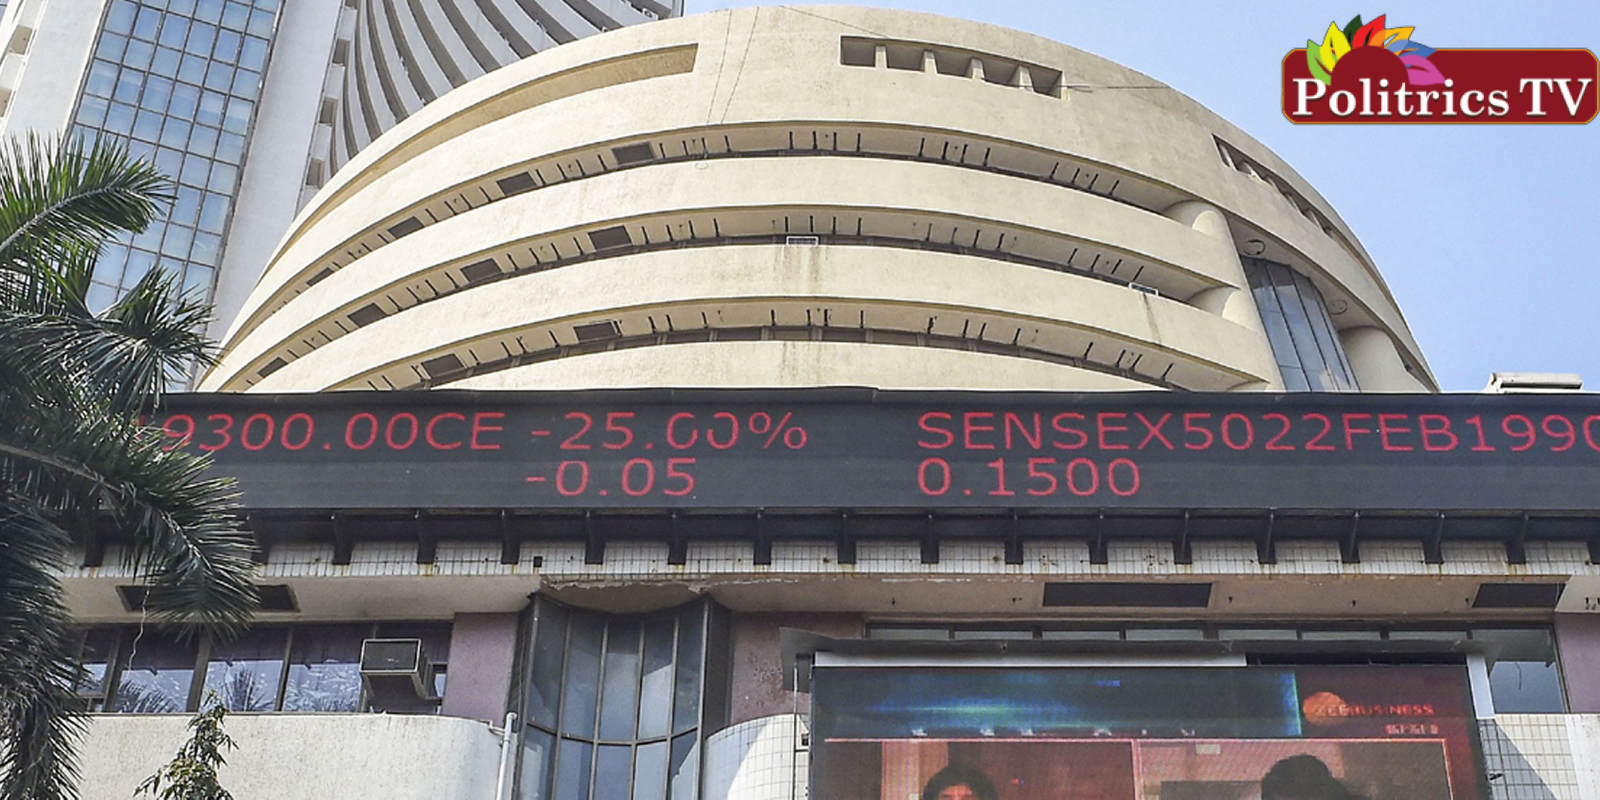 The Sensex ended Thursday's trade up 141.34 points at 77,478.93 and the Nifty 50 up 51.00 points at 23,567.00.